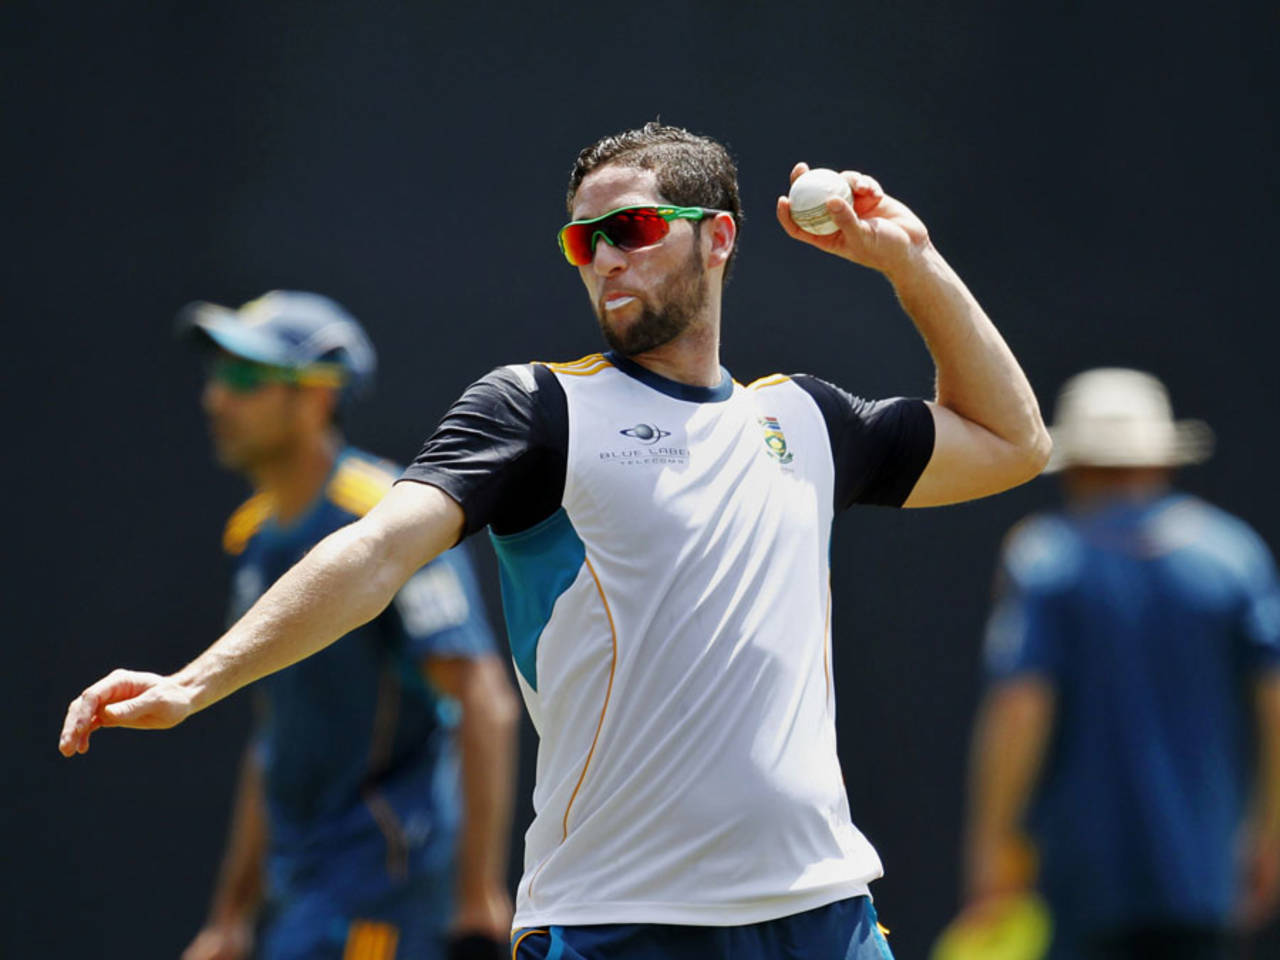 Wayne Parnell throws the ball during a drill at a practice session, Colombo, August 1, 2013